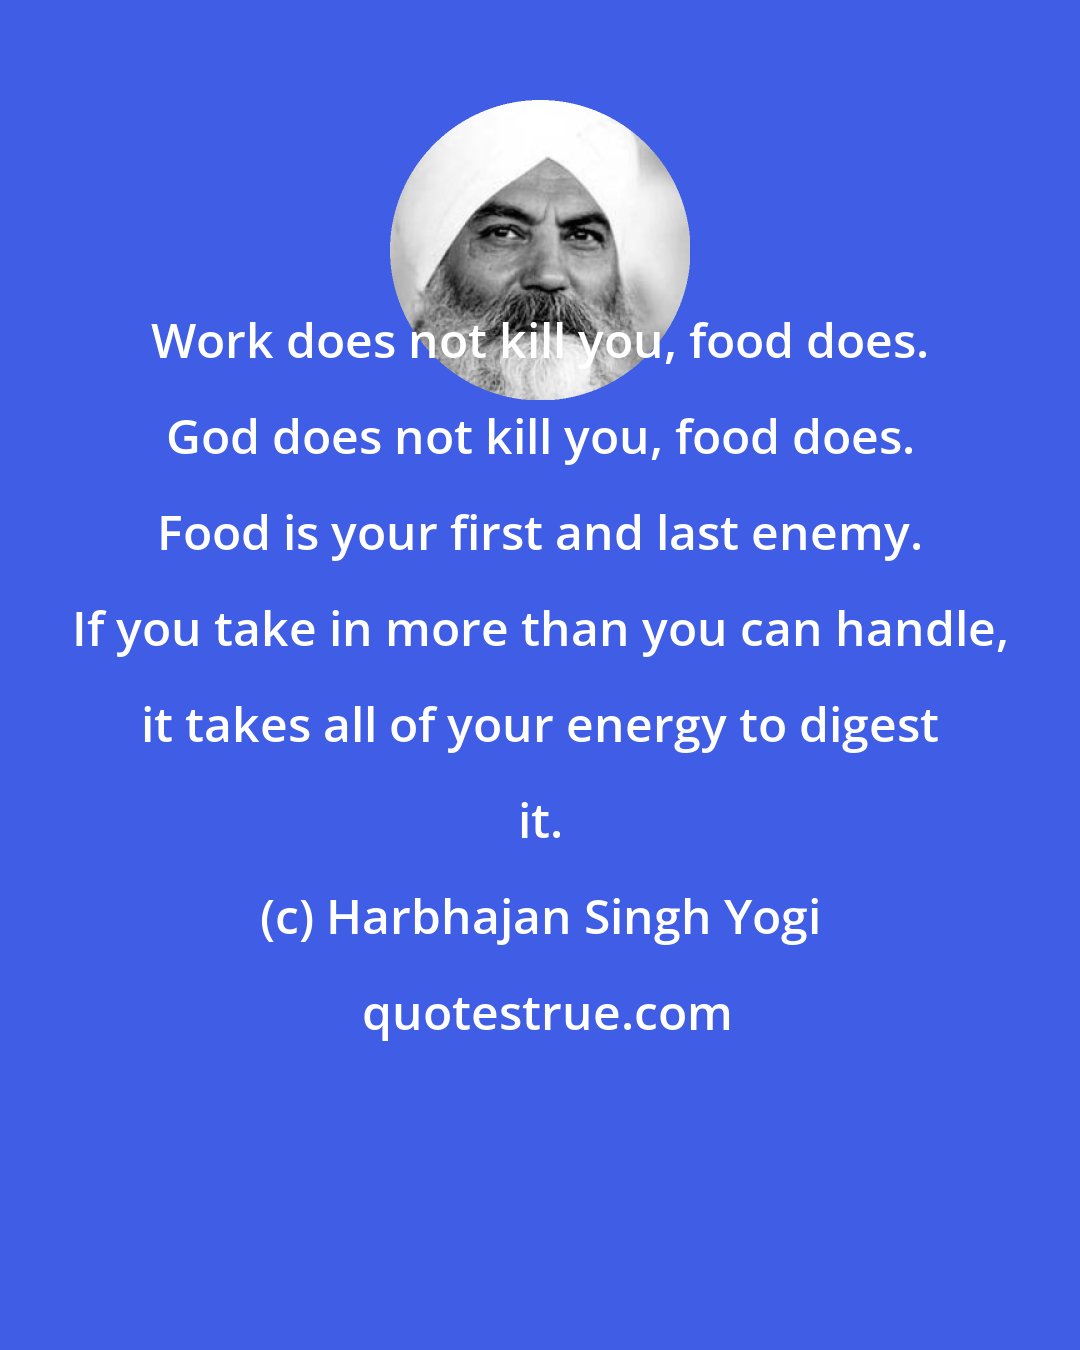 Harbhajan Singh Yogi: Work does not kill you, food does. God does not kill you, food does. Food is your first and last enemy. If you take in more than you can handle, it takes all of your energy to digest it.